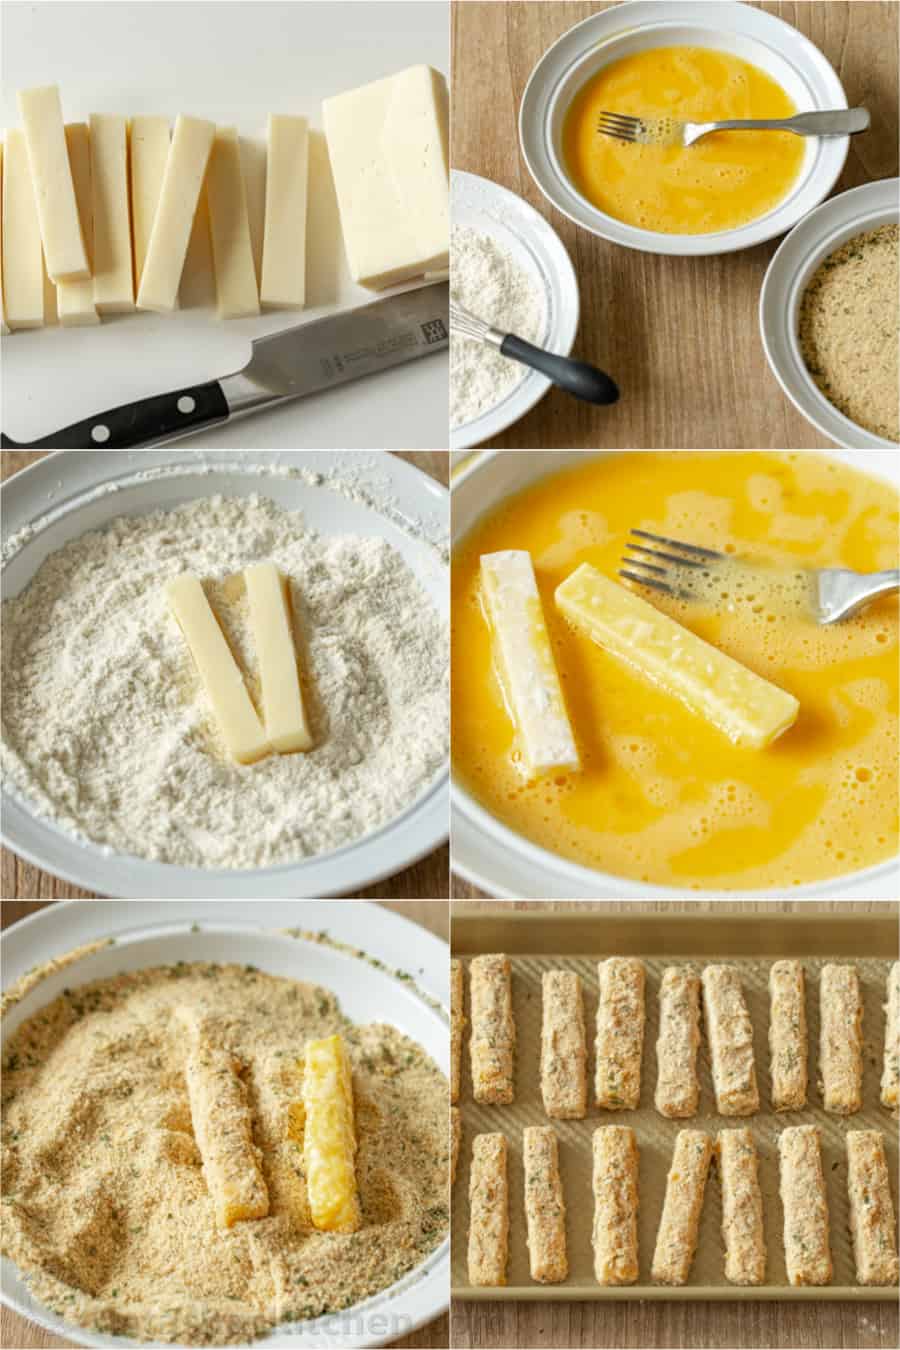 Photo collage showing the process for dredging the cheese sticks in breading.